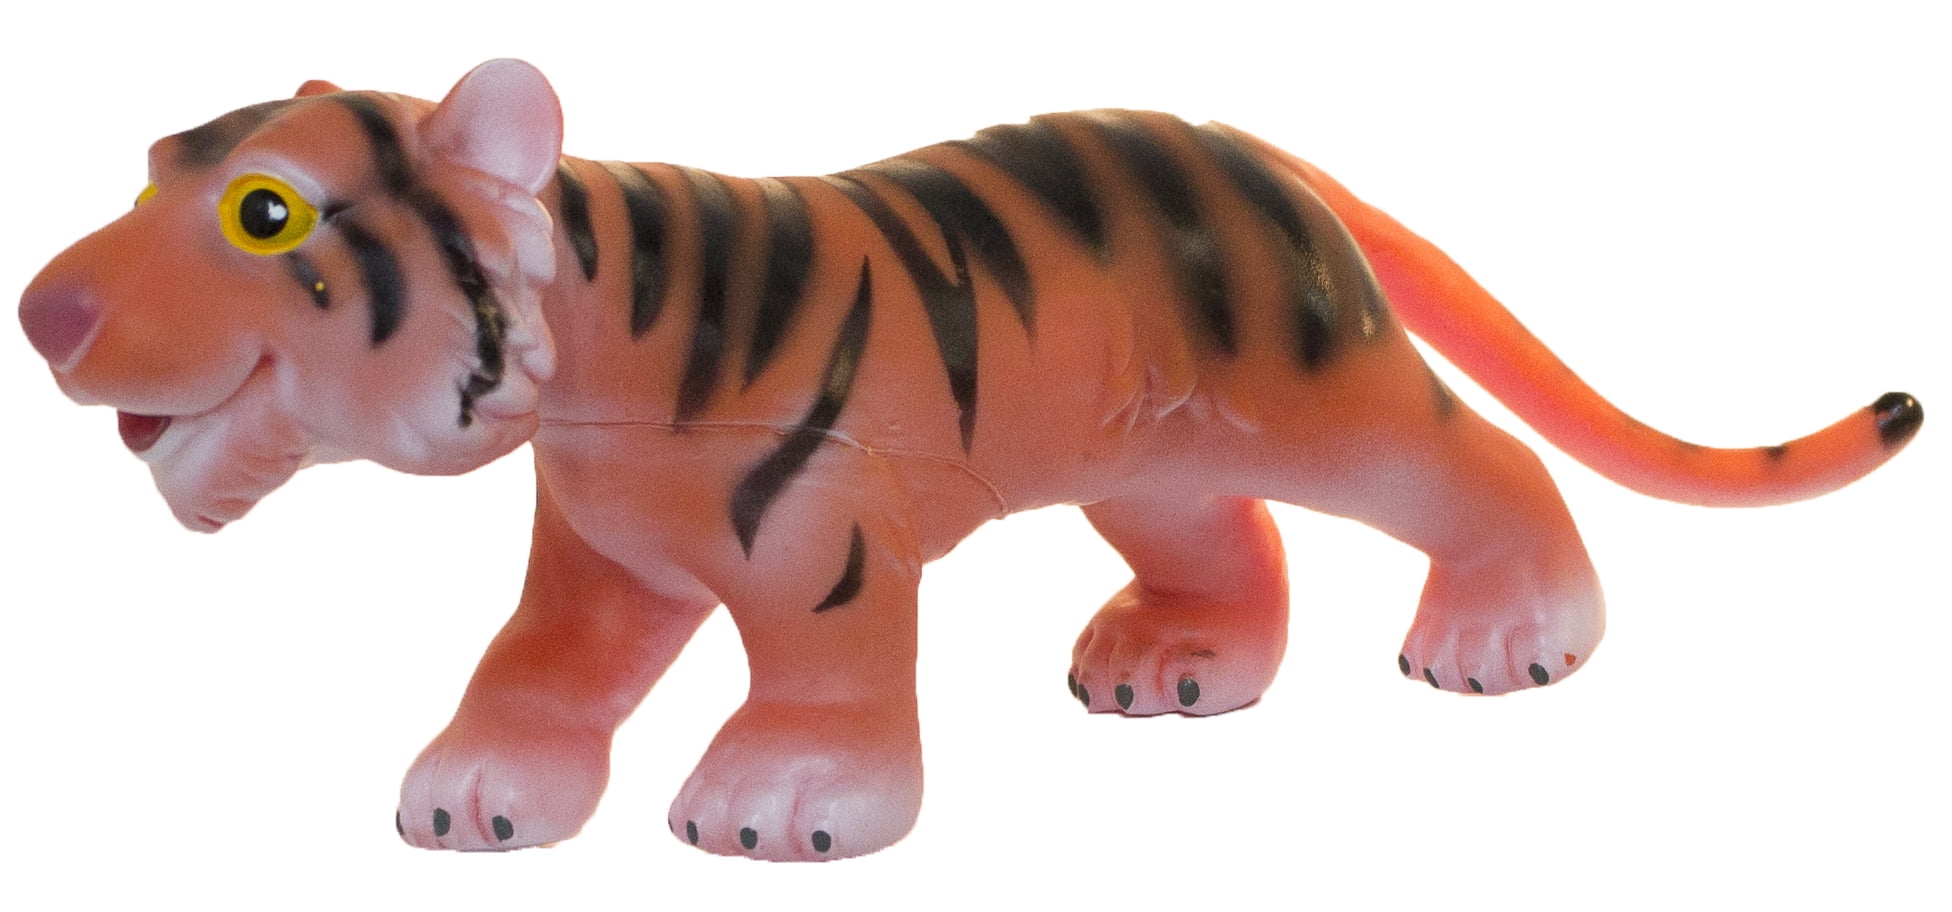 squishy rubber animal toys